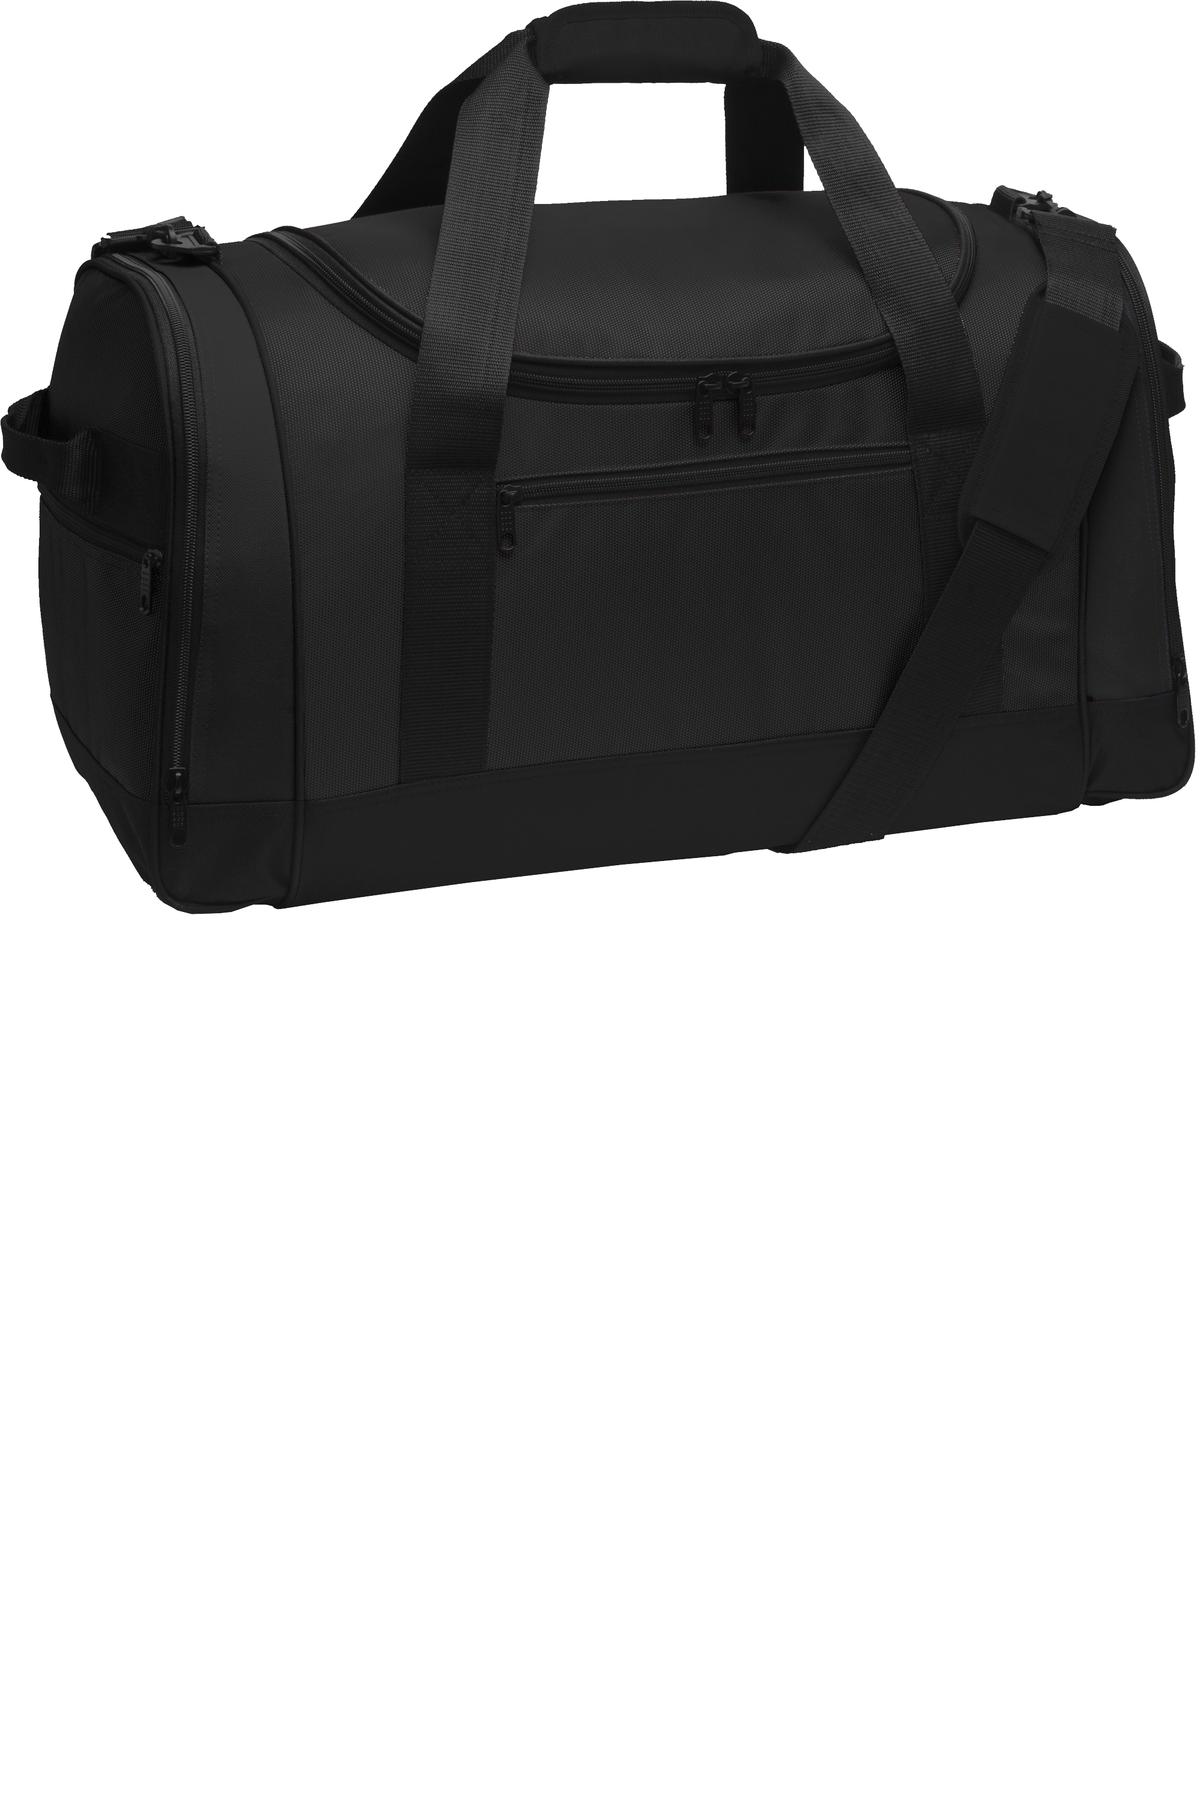 Port Authority Hospitality Bags ® Voyager Sports Duffel.-Port Authority